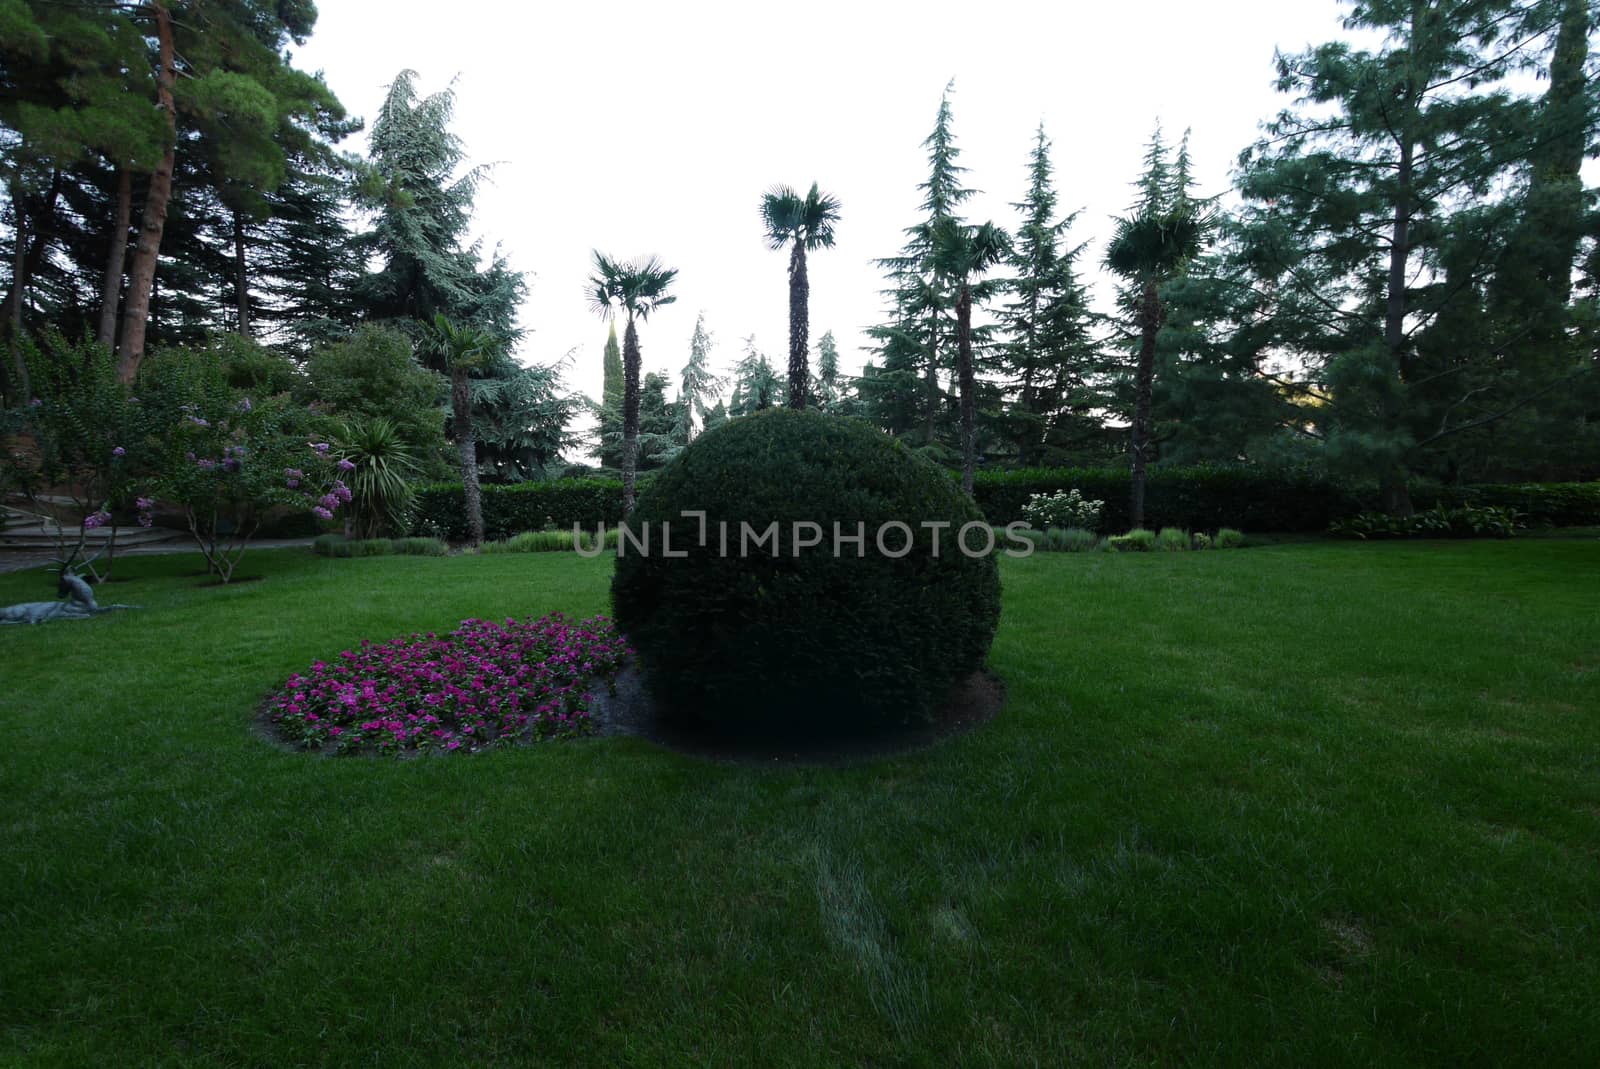 A large lush green bush next to small pink flowers on a background of palm trees and a smoothly cropped lawn by Adamchuk